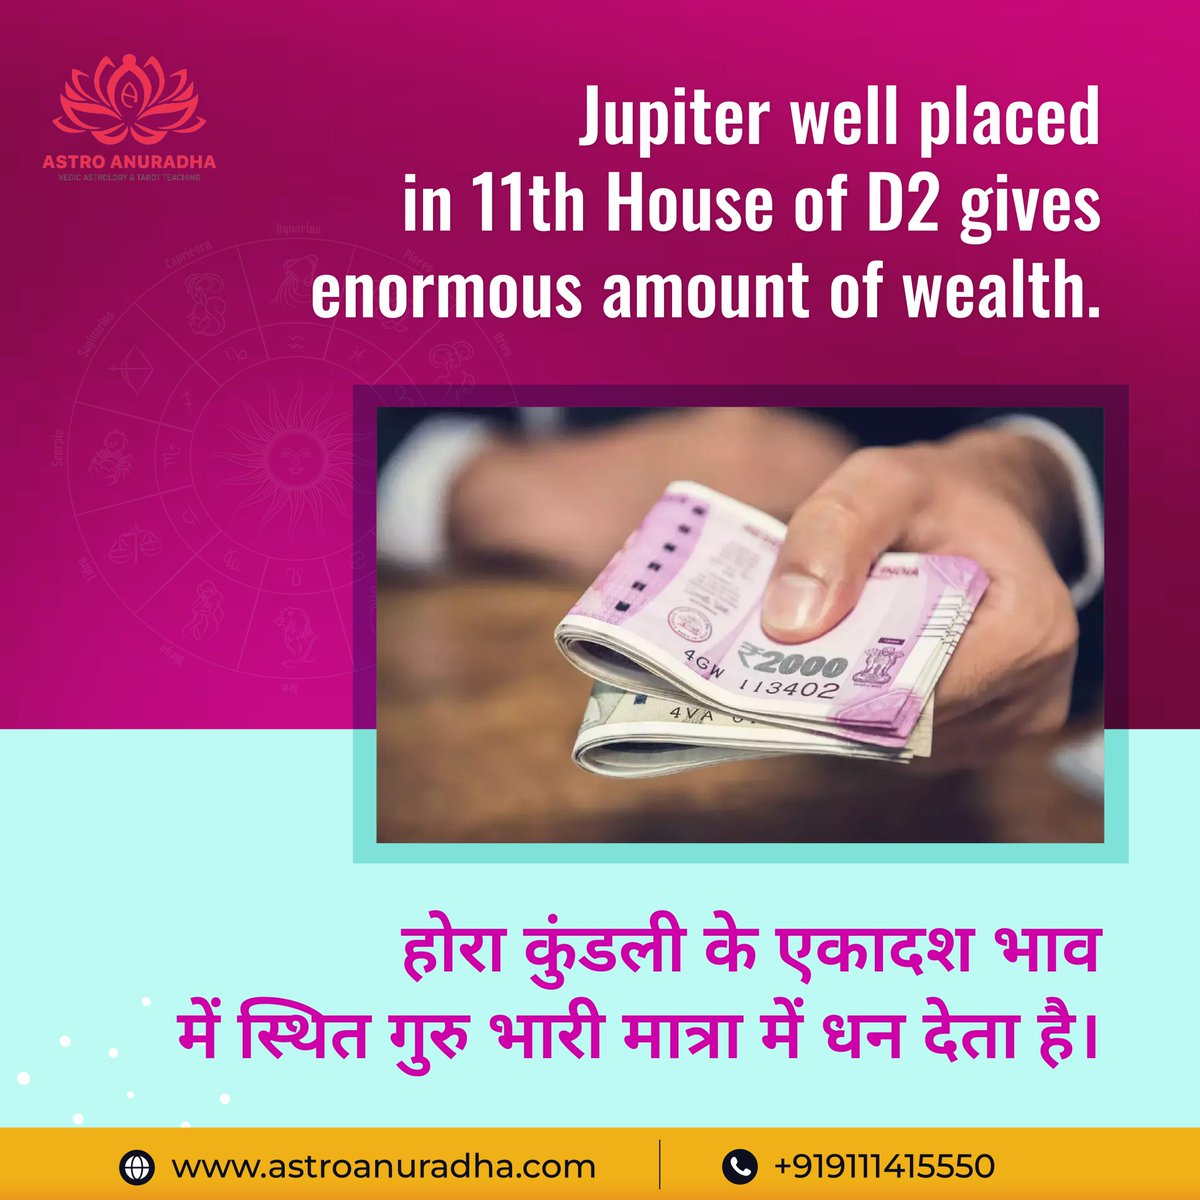 Jupiter when placed in the 11th House of the D 2 gives enormous amount of wealth.
होरा कुंडली के एकादश भाव में स्थित गुरु भारी मात्रा में धन देता है।
#astrology #vedicastrology #vedicastrologer #divisionalcharts #hora #d2  #Jupiter #greatwealth 
astroanuradha.com